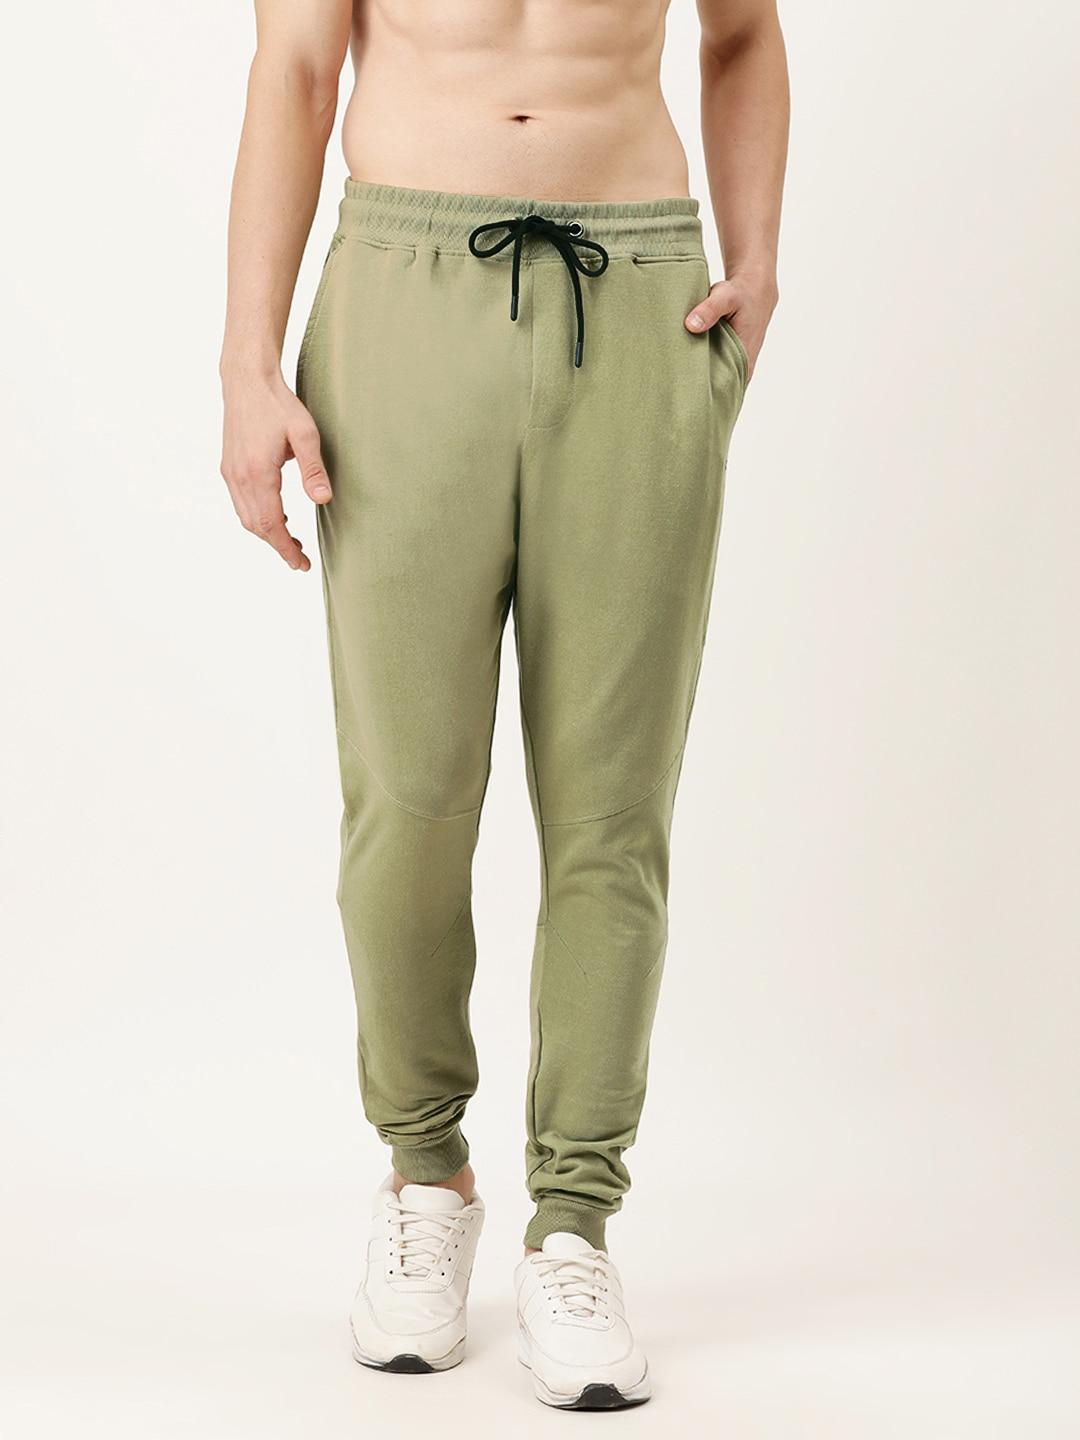 flying-machine-men-olive-green-solid-regular-fit-cotton-joggers